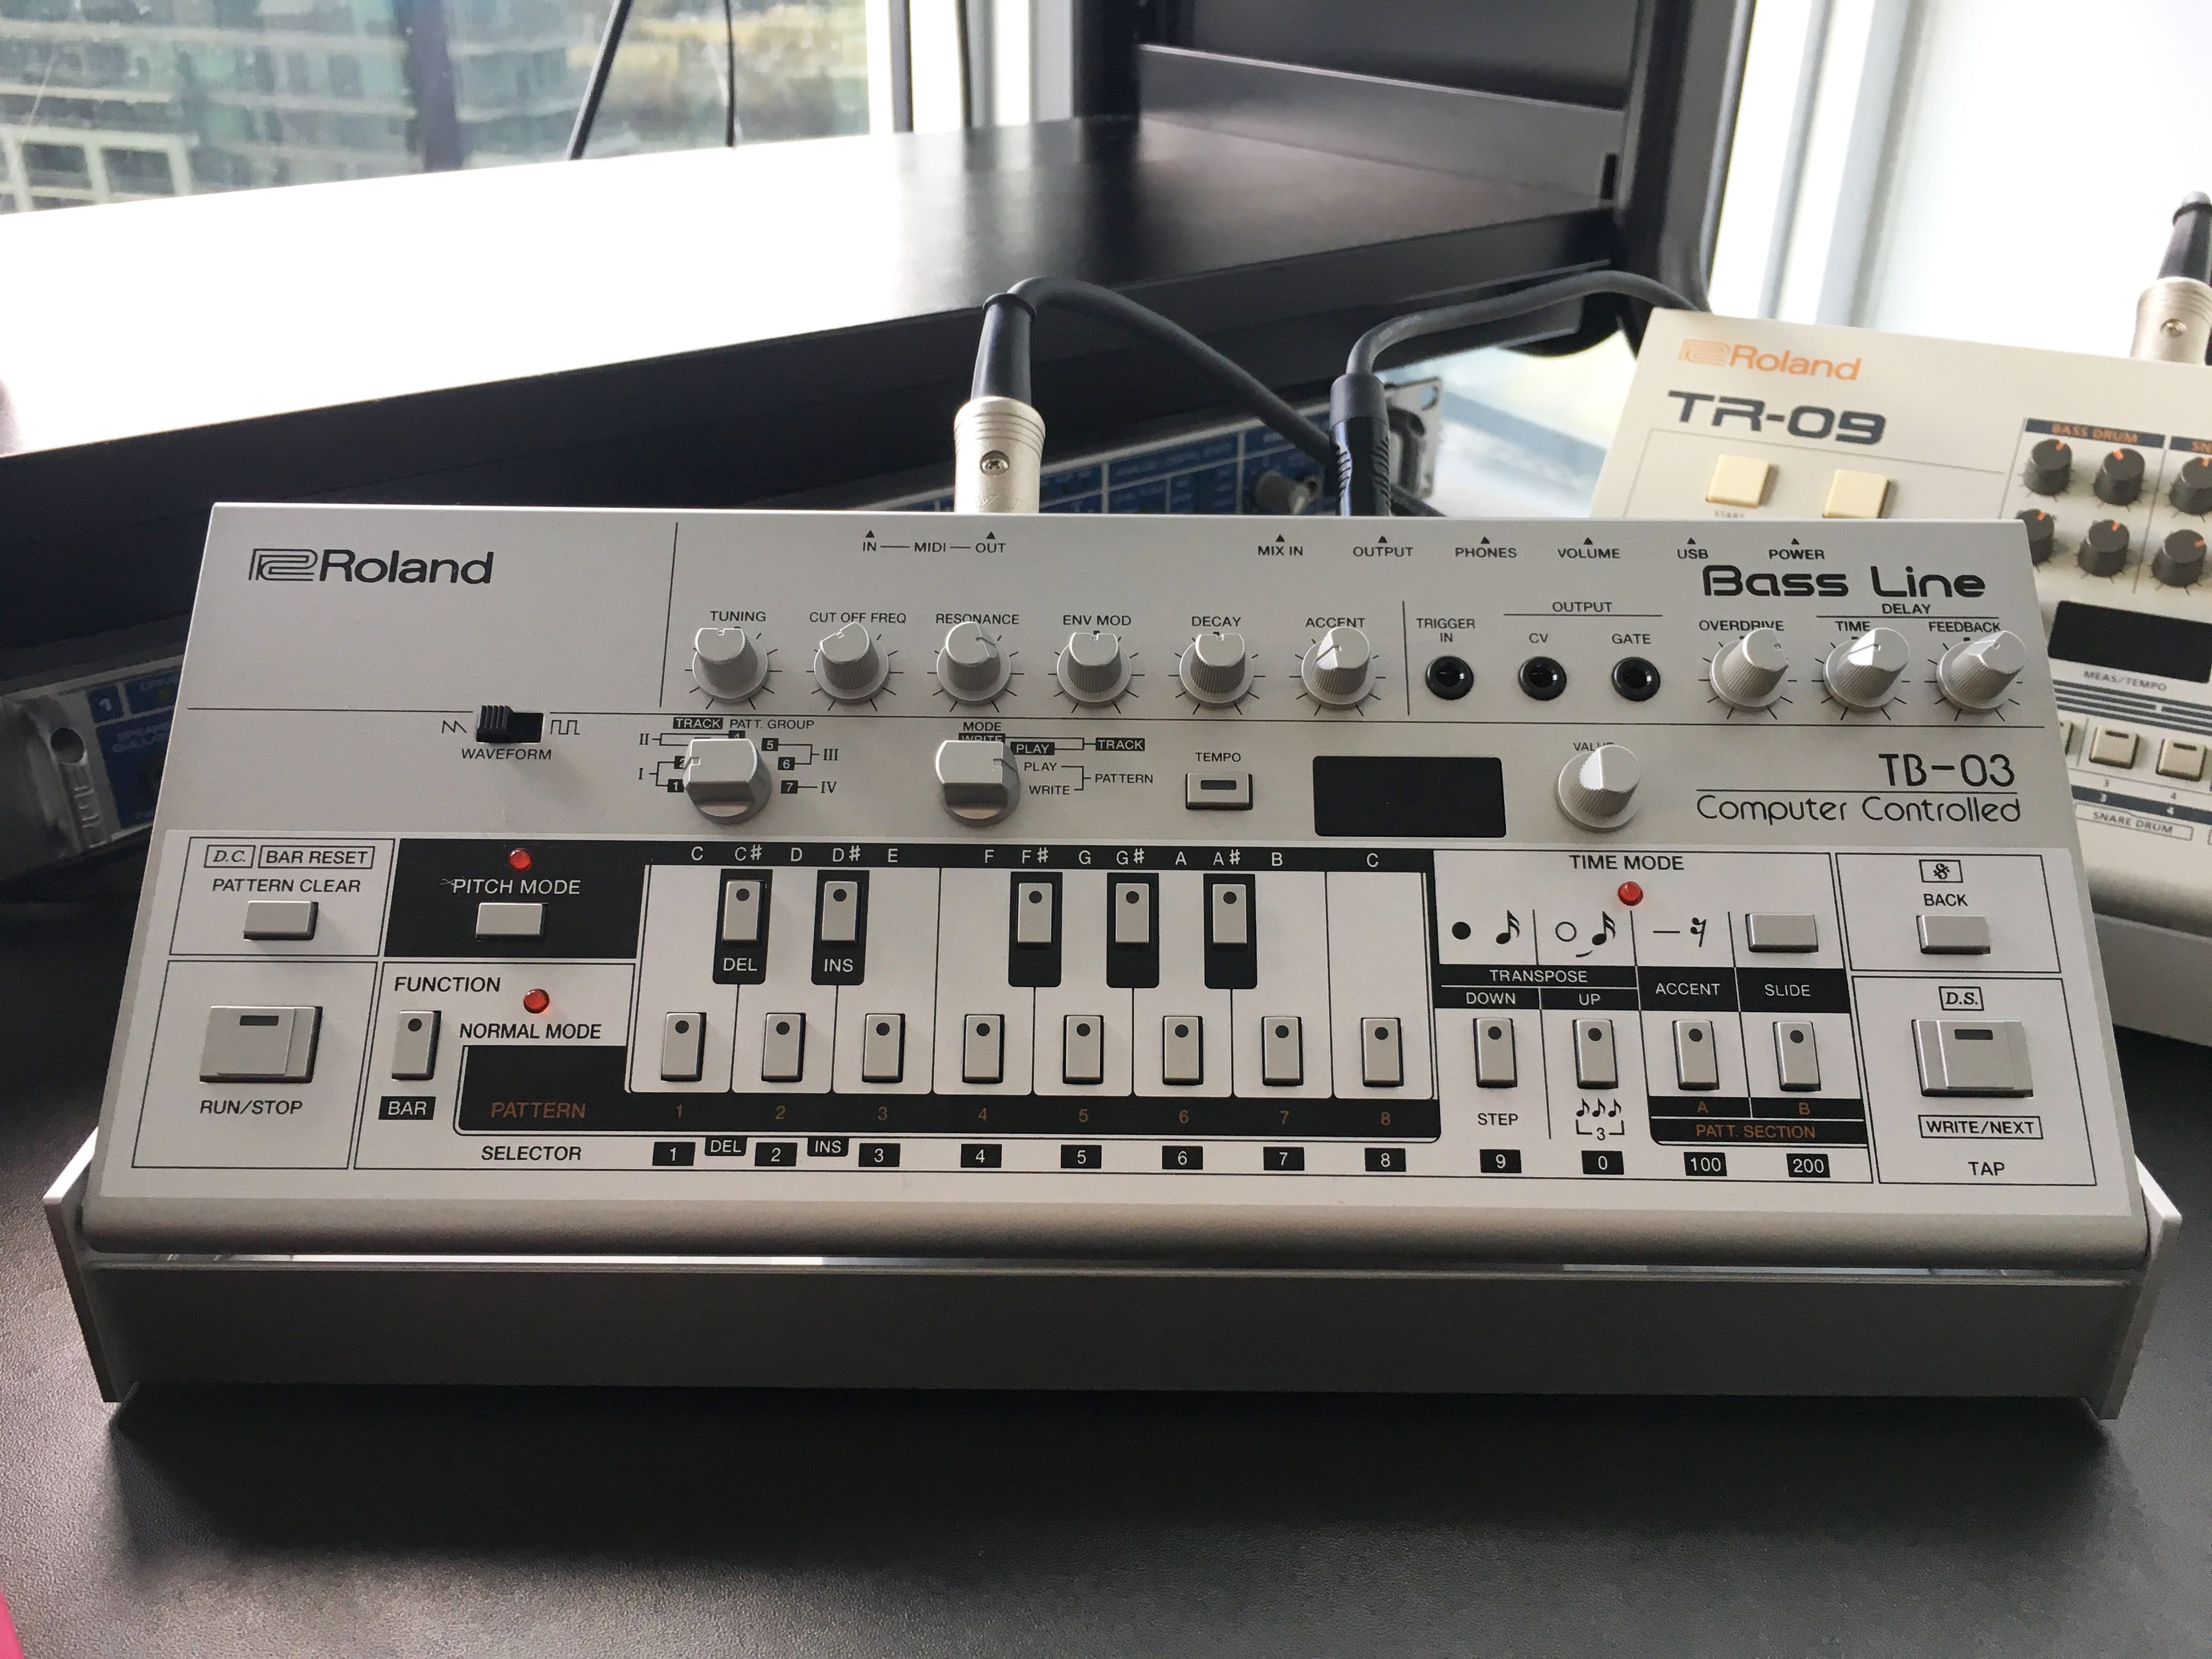 Getting Started With the Roland TB-03 Synth : Ask.Audio